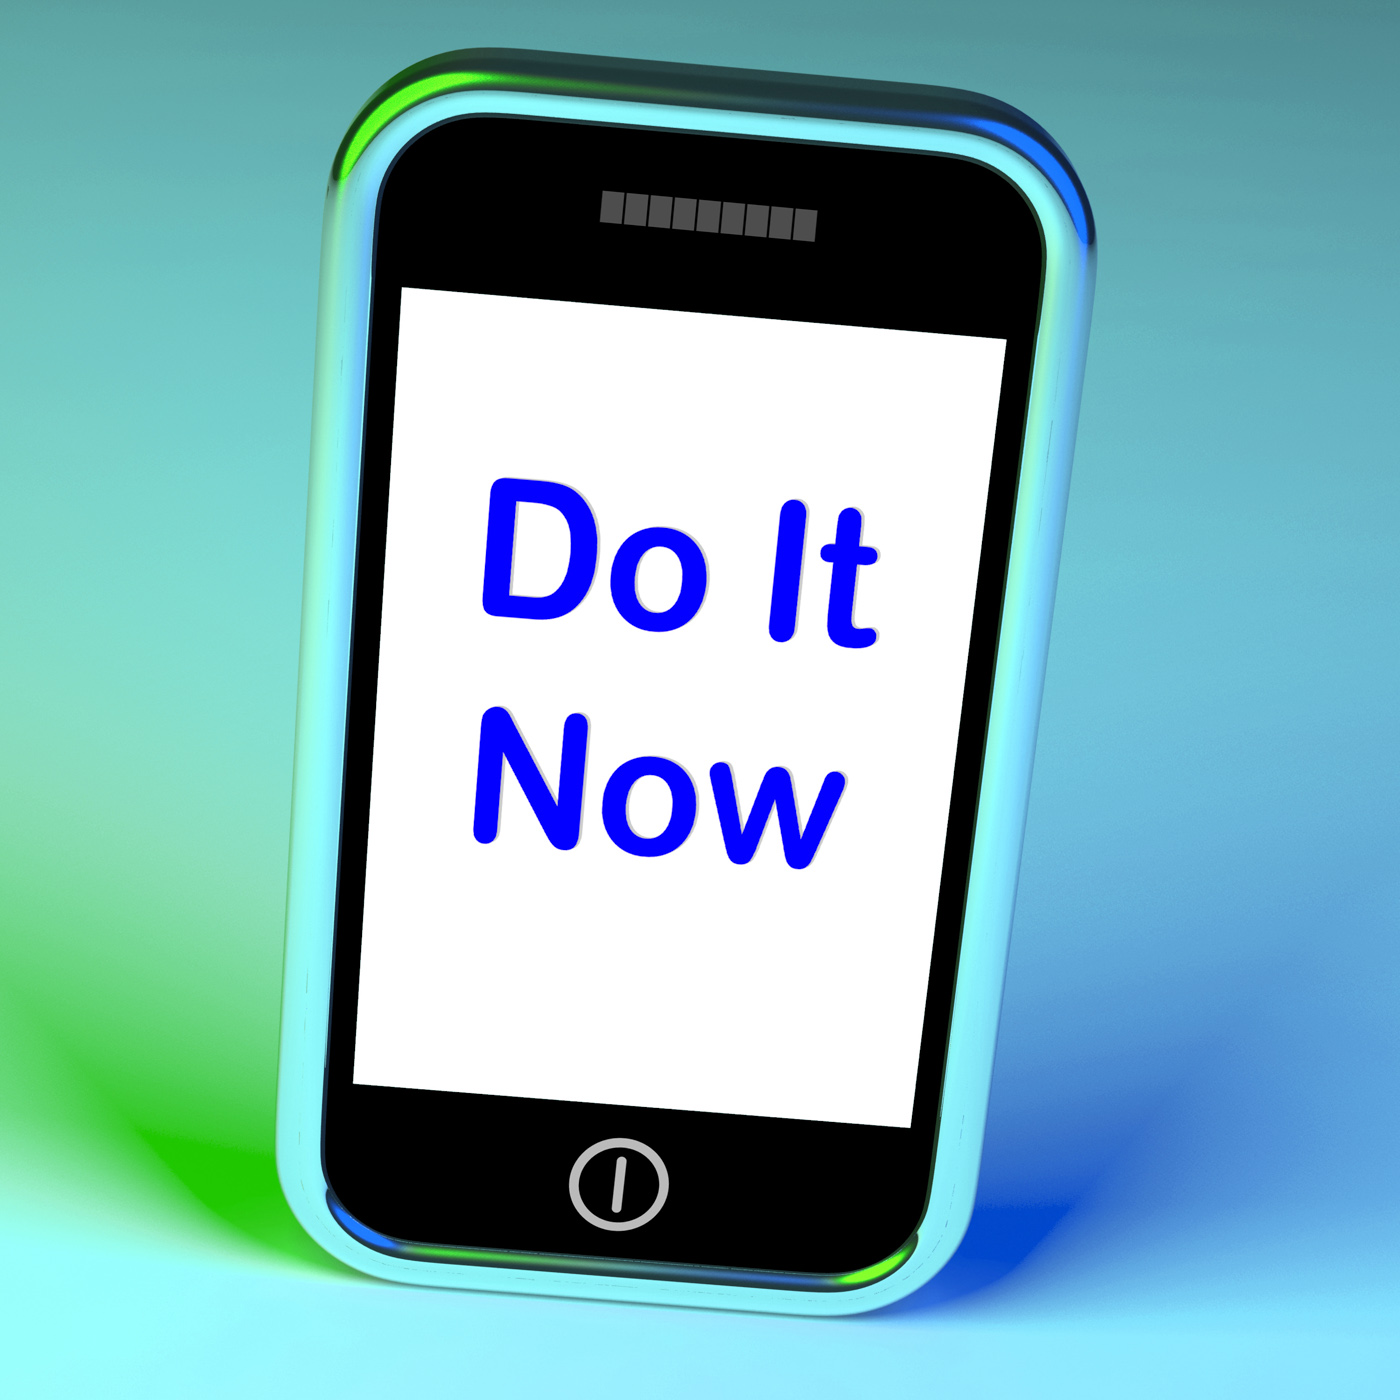 Do It Now On Phone Shows Act Immediately, Act, Inspired, Smartphone, Proactive, HQ Photo